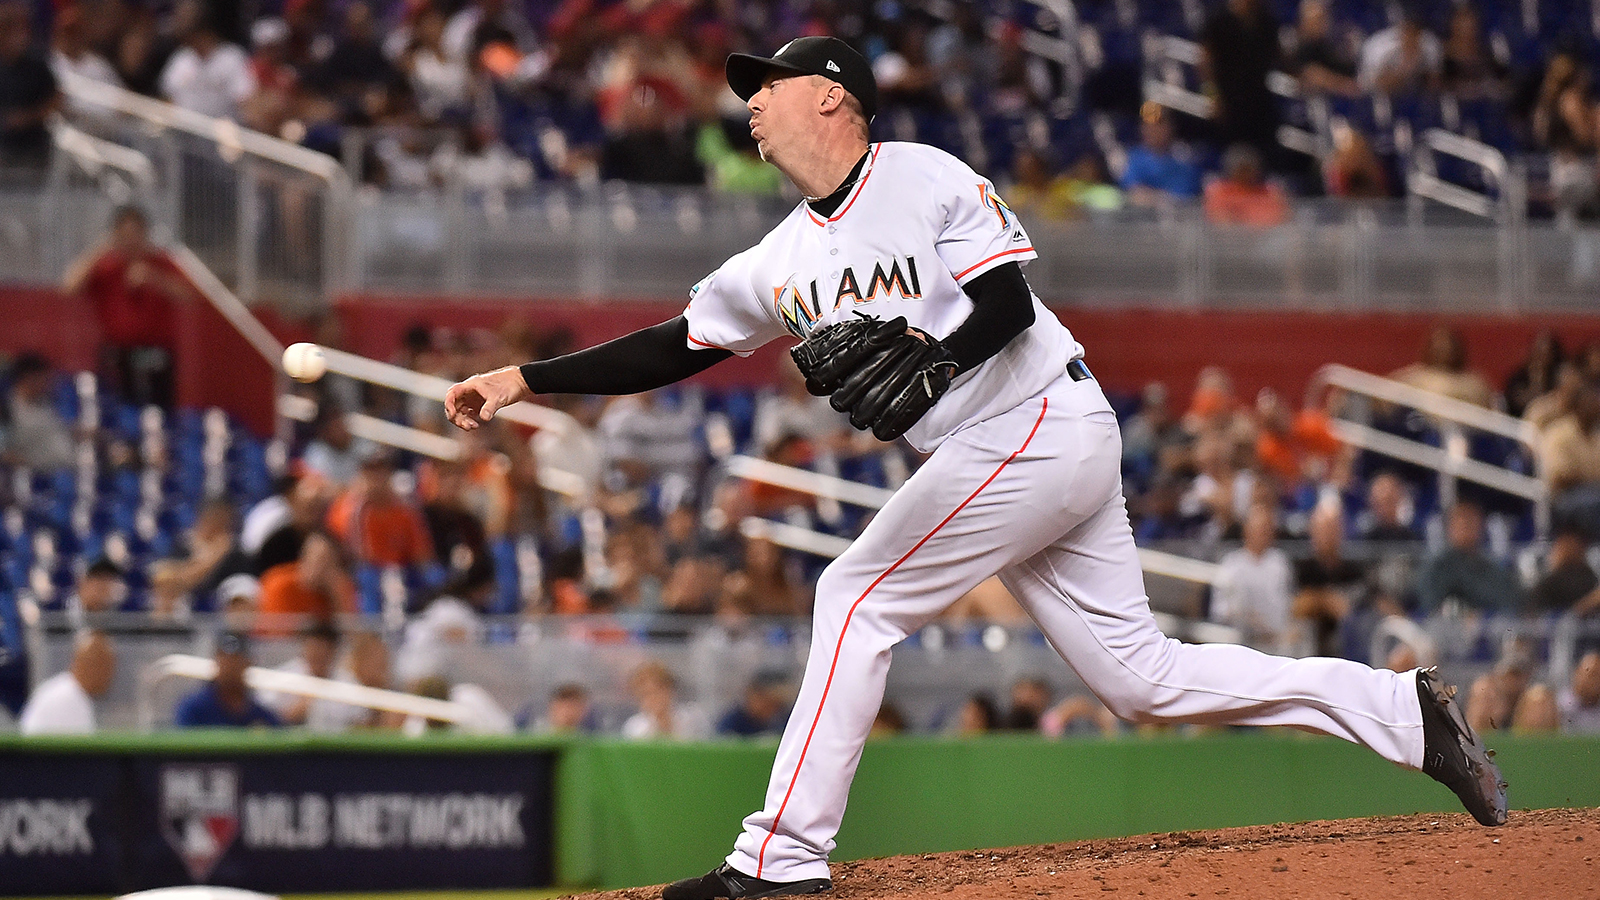 Back to the desert: Marlins trade reliever Brad Ziegler to Diamondbacks for pitching prospect Tommy Eveld